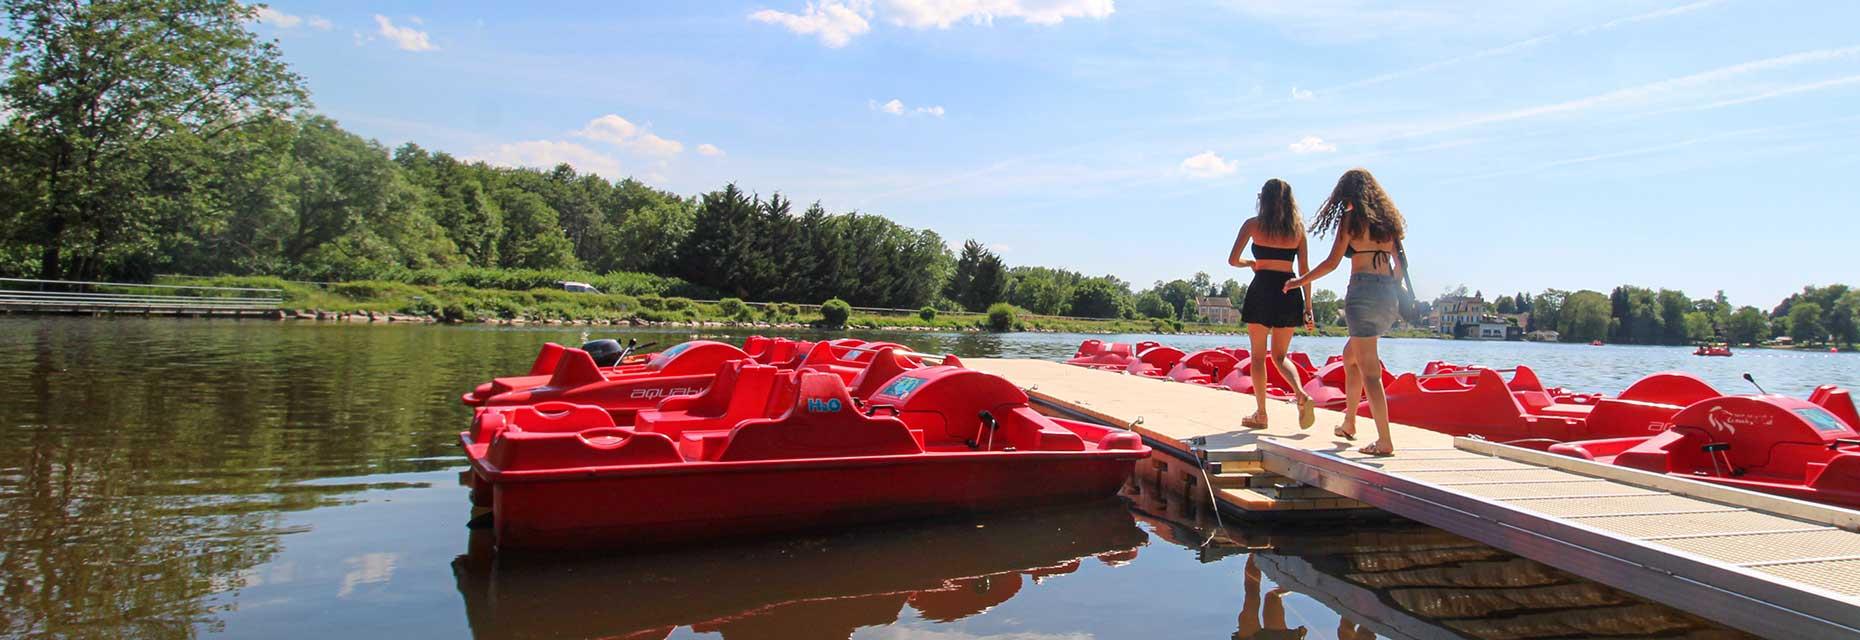 Pedal boat activity at the Ballastières leisure base in Haute-Saône